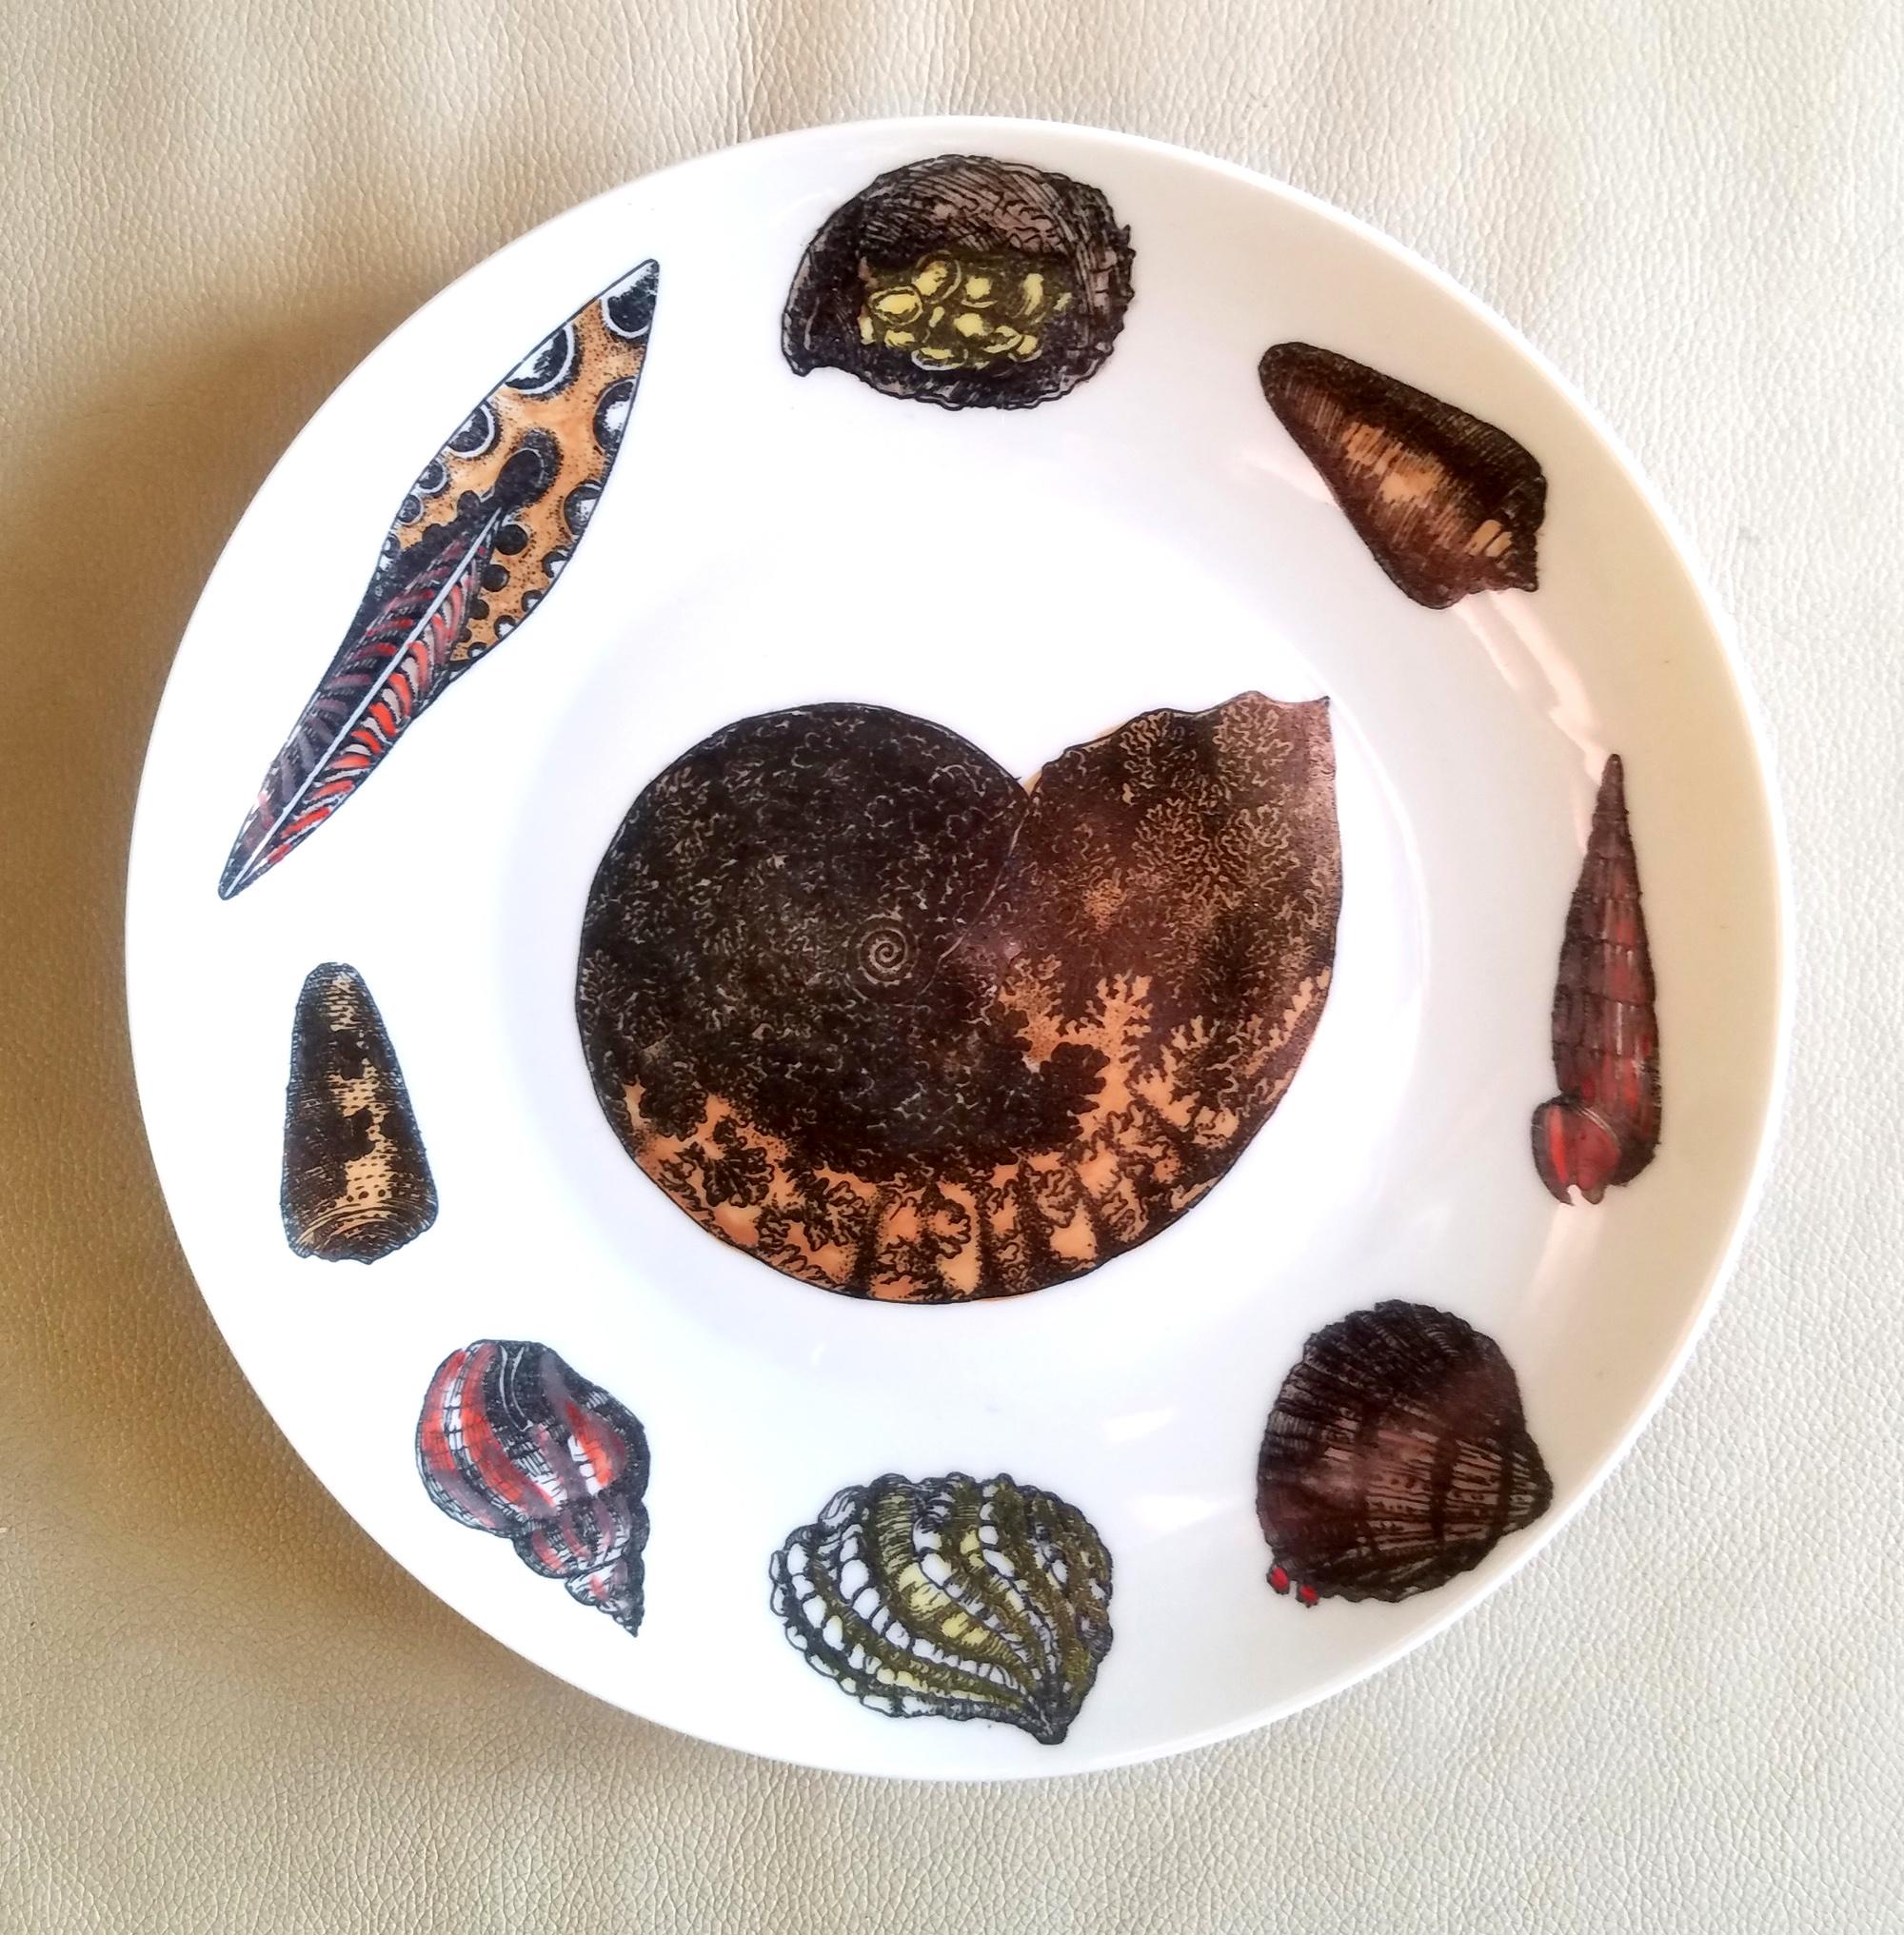 Piero Fornasetti Porcelain Conchiglie Seashell Set of Plates with Mollusks For Sale 2